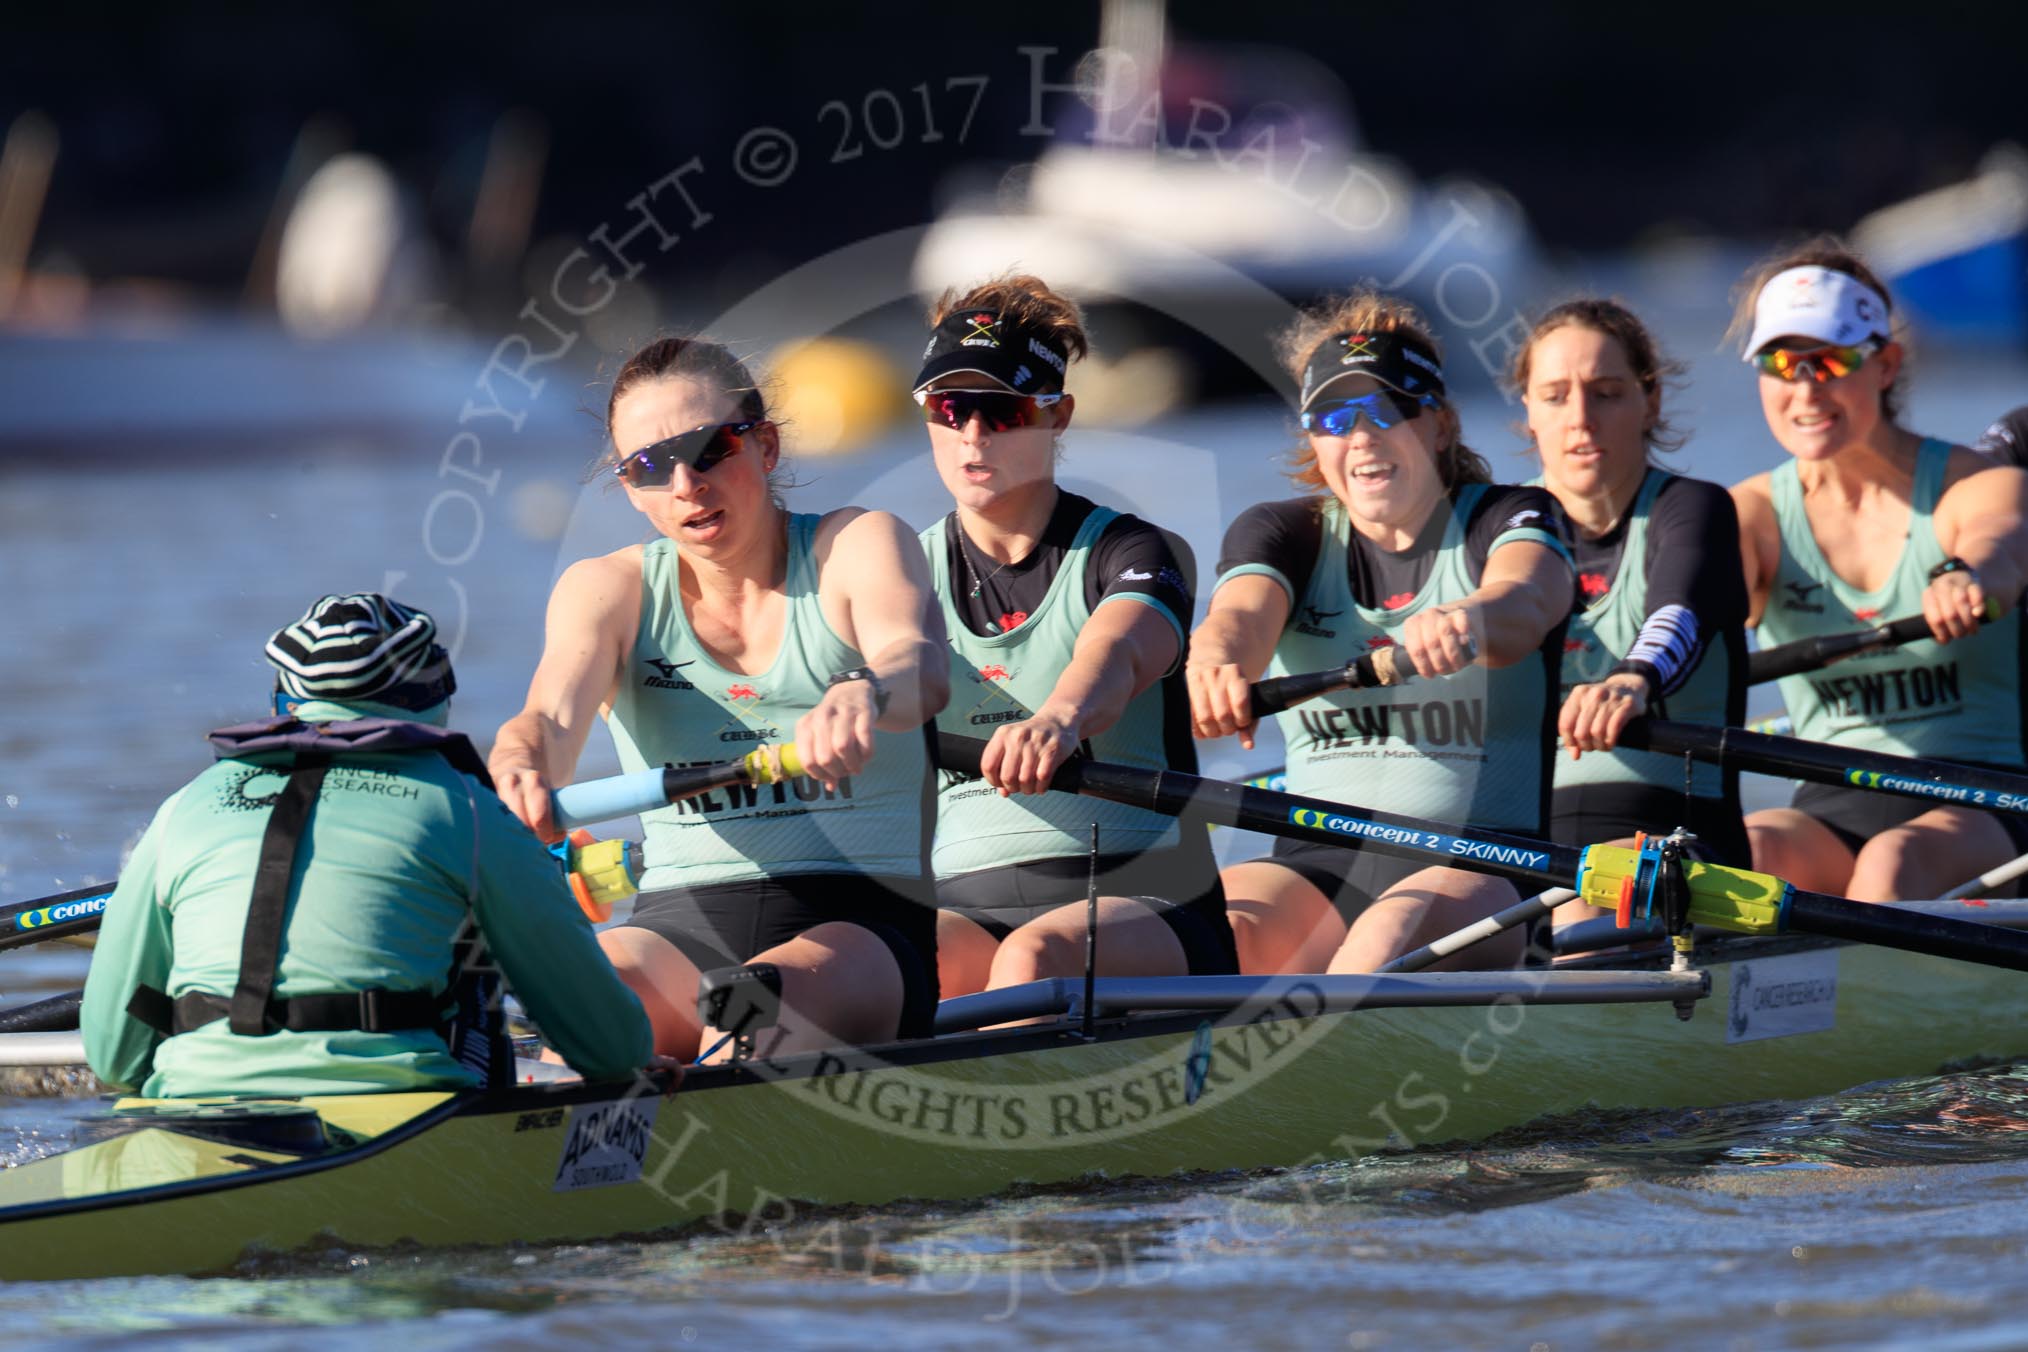 The Women's Boat Race season 2018 - fixture CUWBC vs. ULBC: CUWBC extending their lead near the Putney boat houses - here cox Sophie Shapter, stroke Tricia Smith, 7 Imogen Grant, 6 Anne Beenken, 5 Thea Zabell, 4 Paula Wesselmann.
River Thames between Putney Bridge and Mortlake,
London SW15,

United Kingdom,
on 17 February 2018 at 13:10, image #54